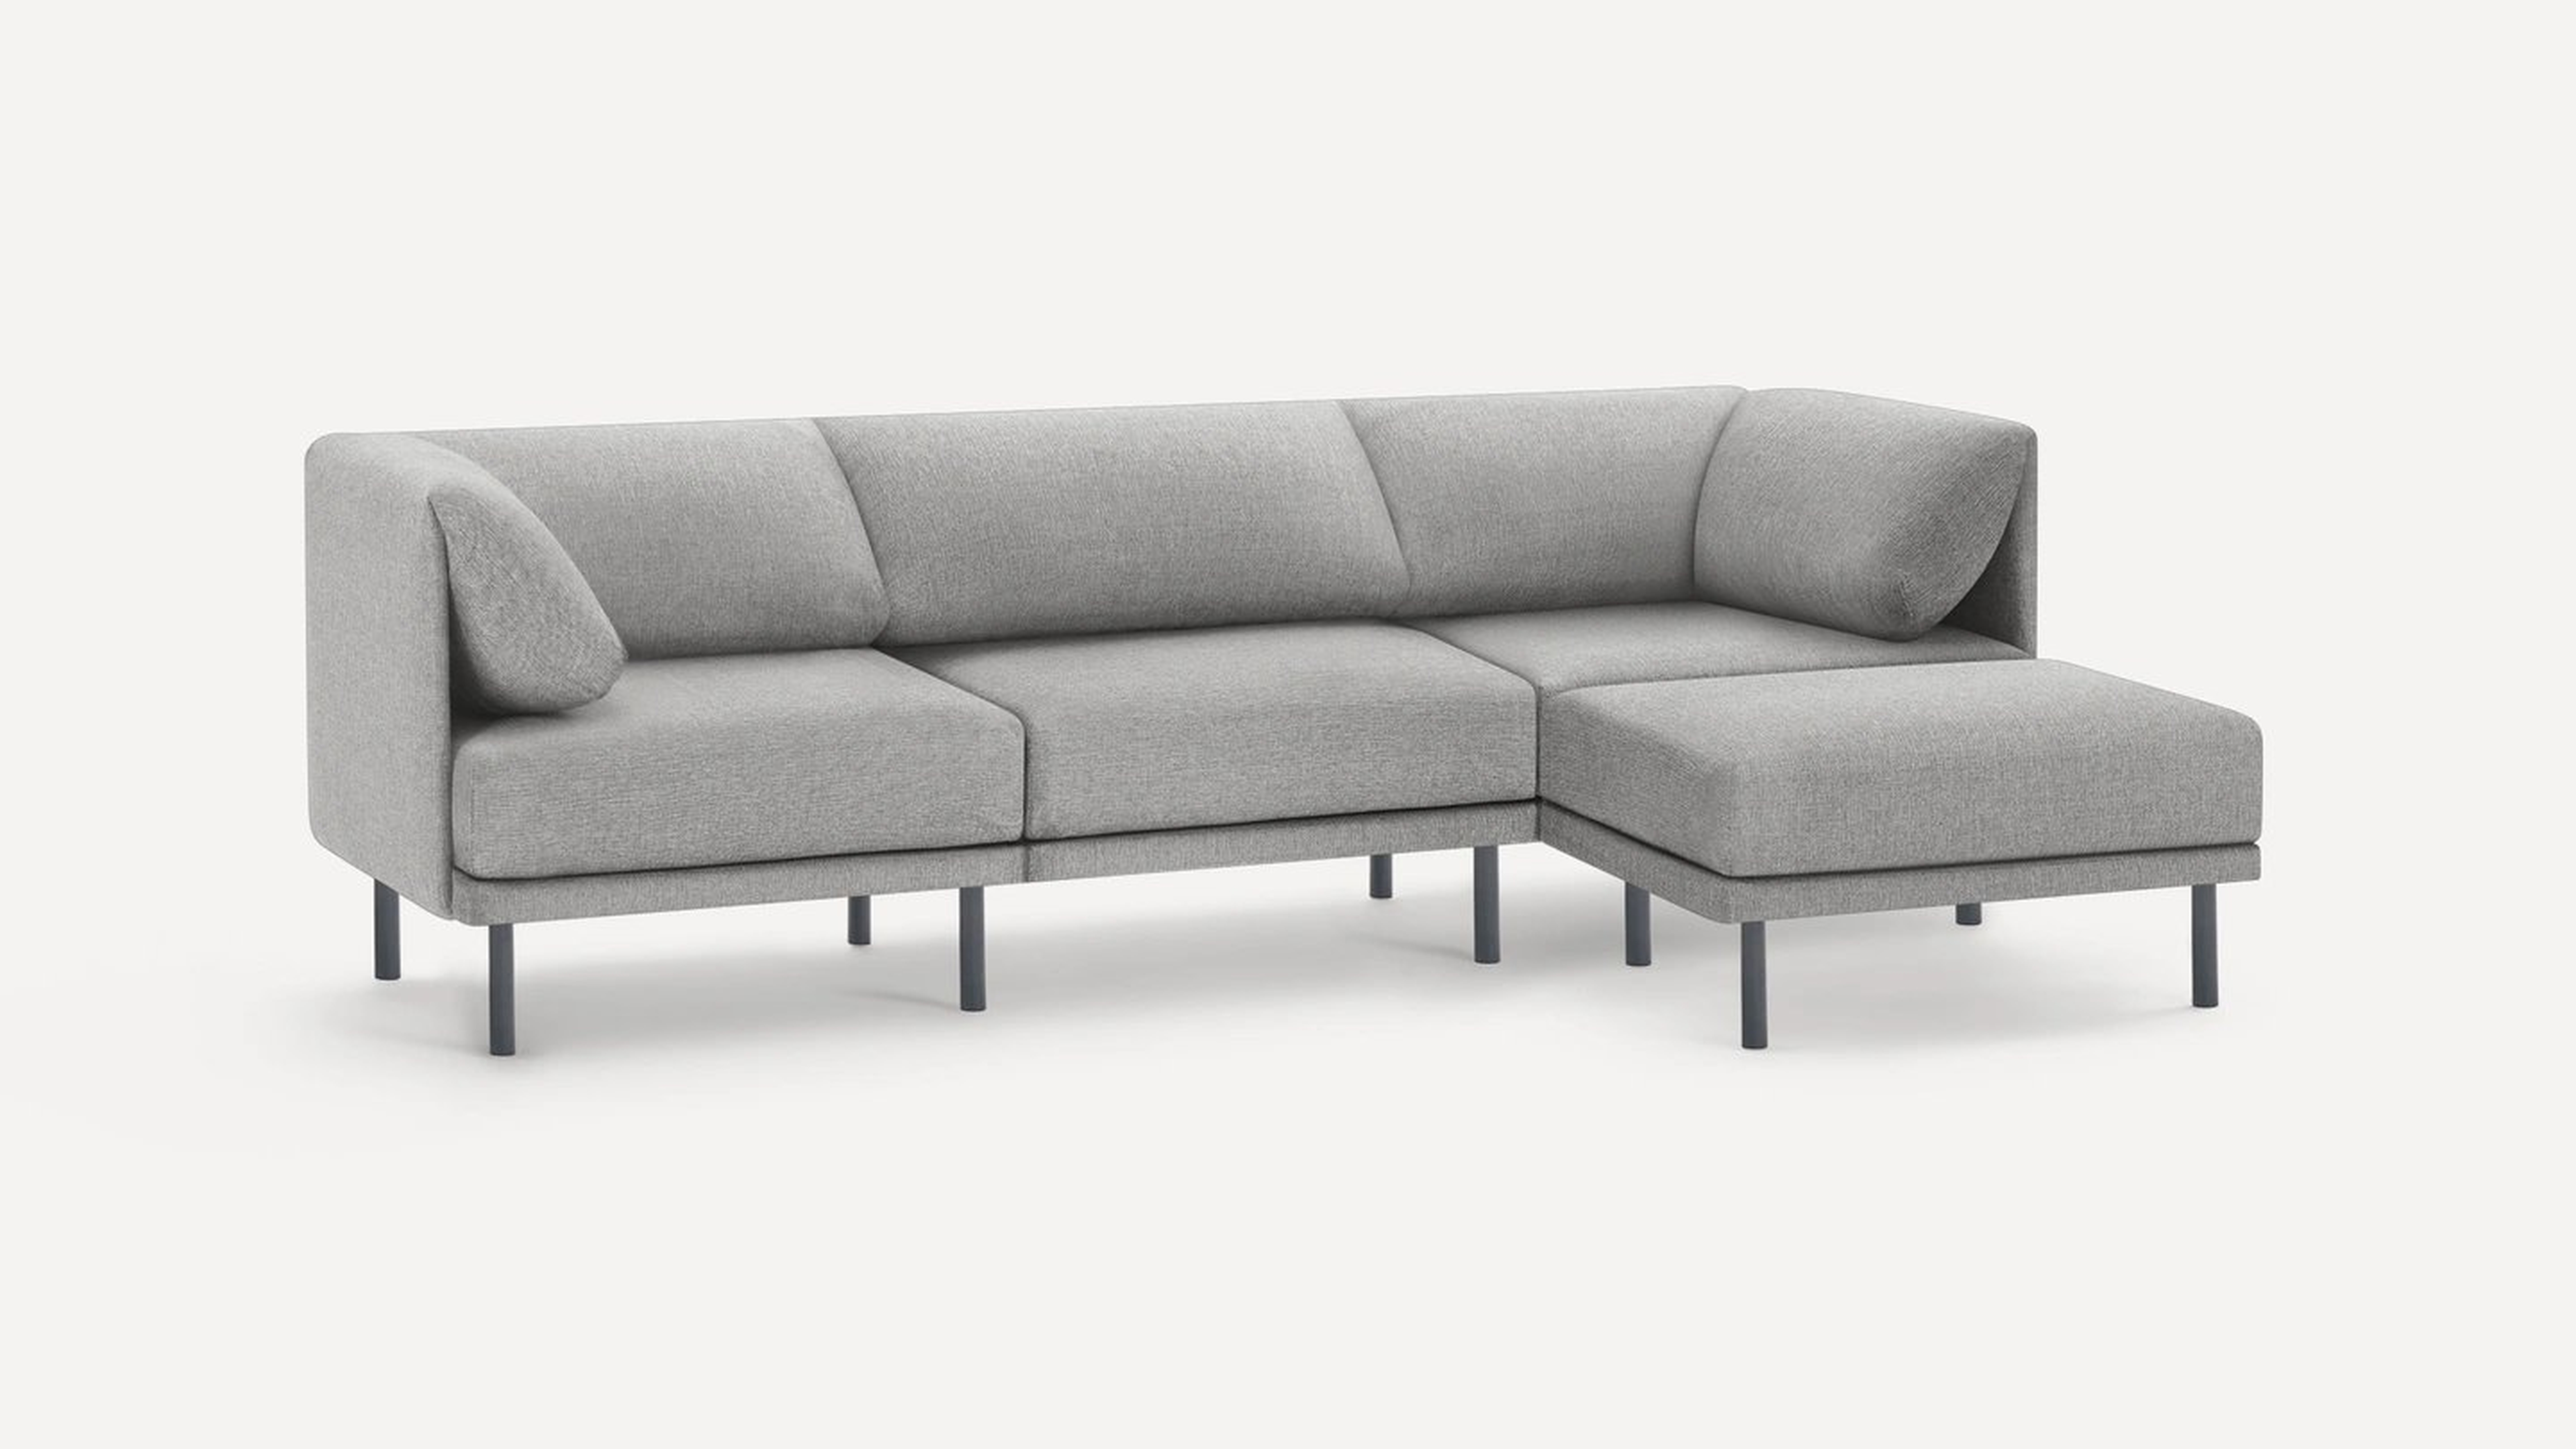 The Range 4-Piece Sectional Lounger in Stone Gray - Burrow